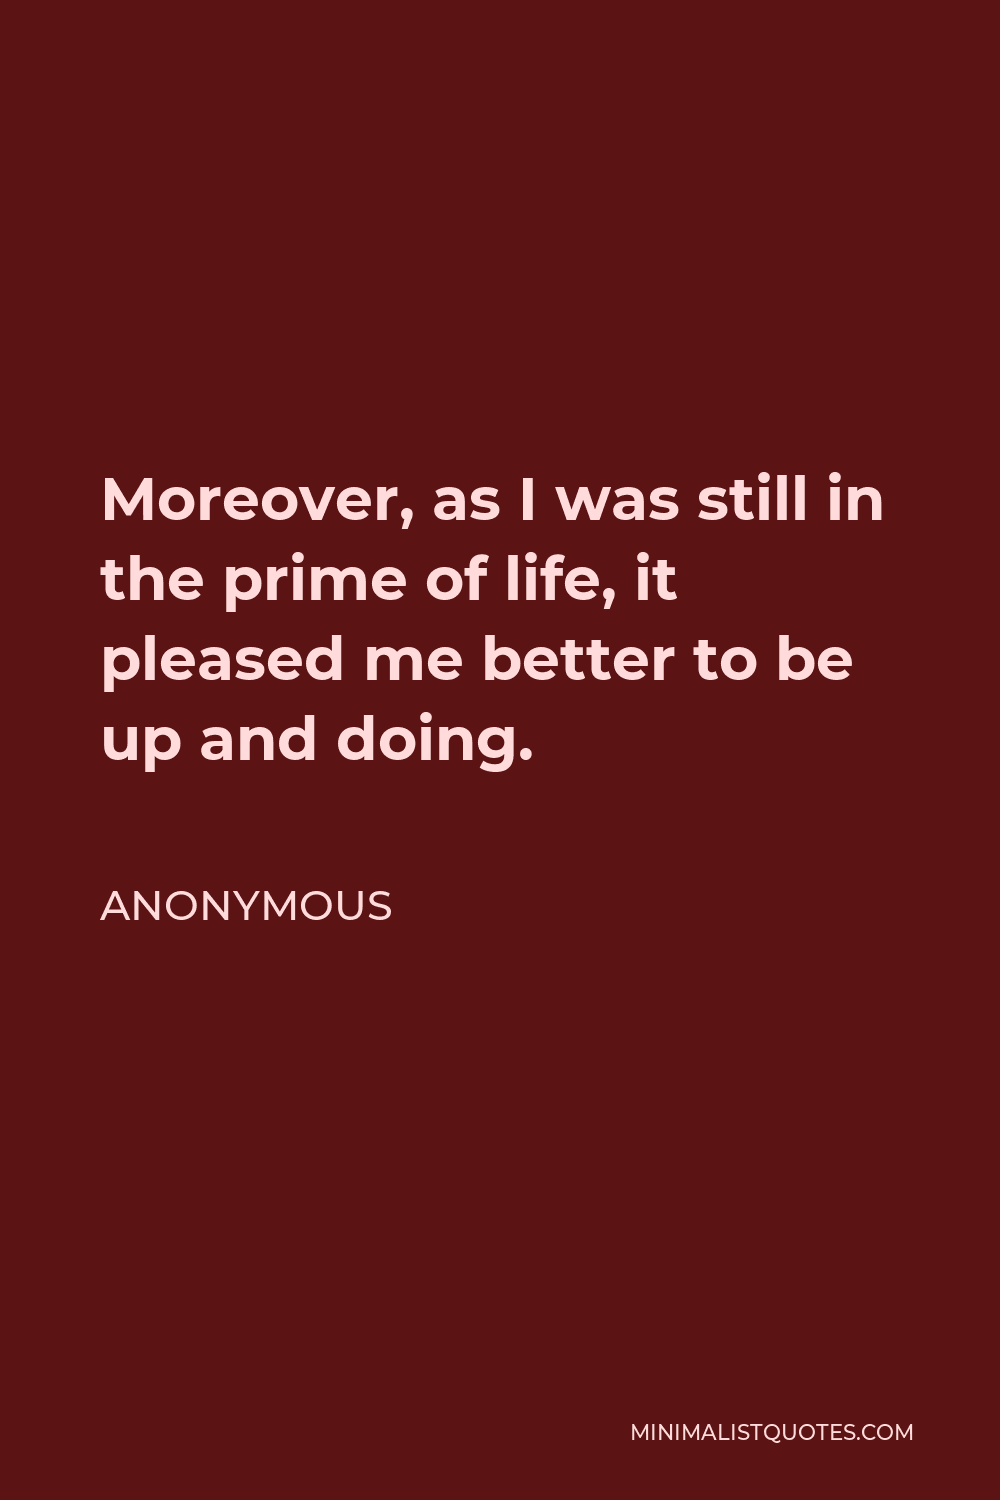 Anonymous Quote - Moreover, as I was still in the prime of life, it pleased me better to be up and doing.